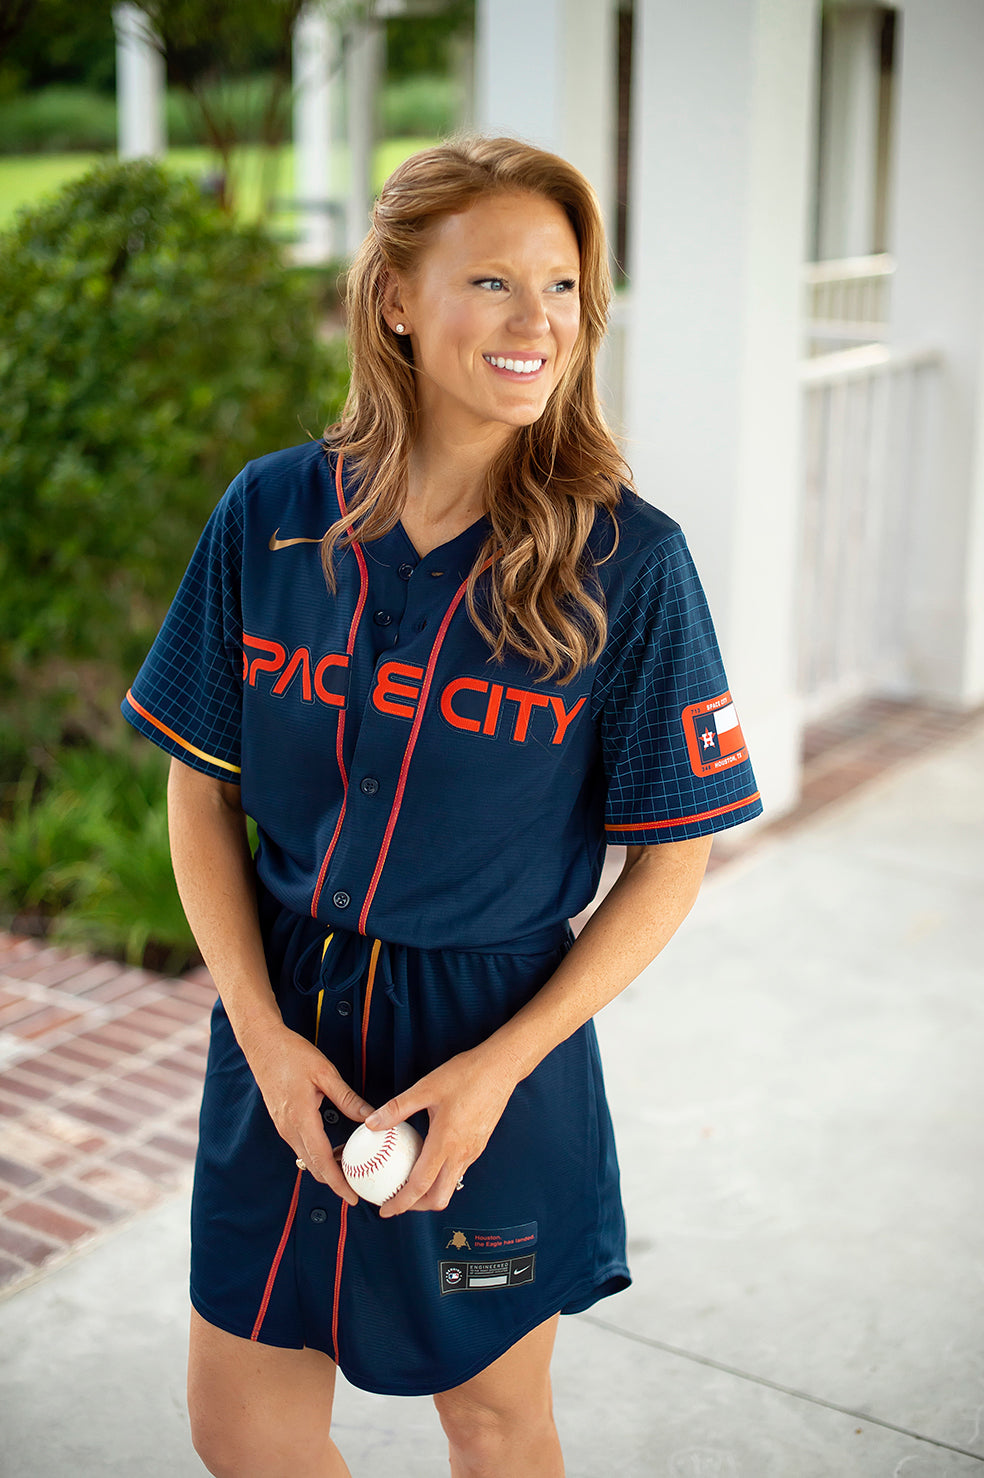 Official Women's Houston Astros Nike Gear, Womens Astros Apparel, Nike  Ladies Astros Outfits